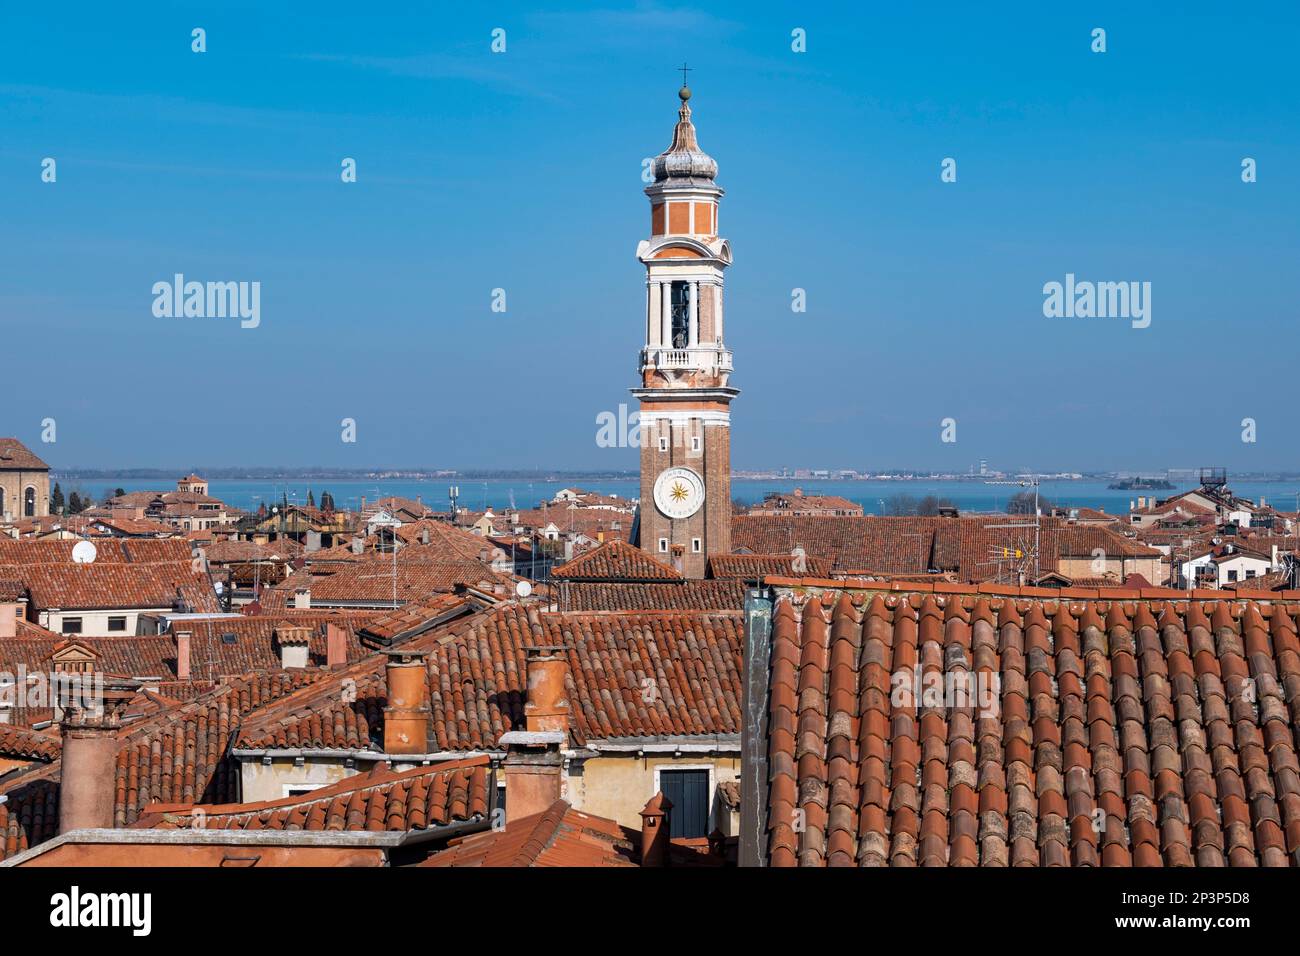 A clock tower rises above the rooftops of Venice, Italy Stock Photo